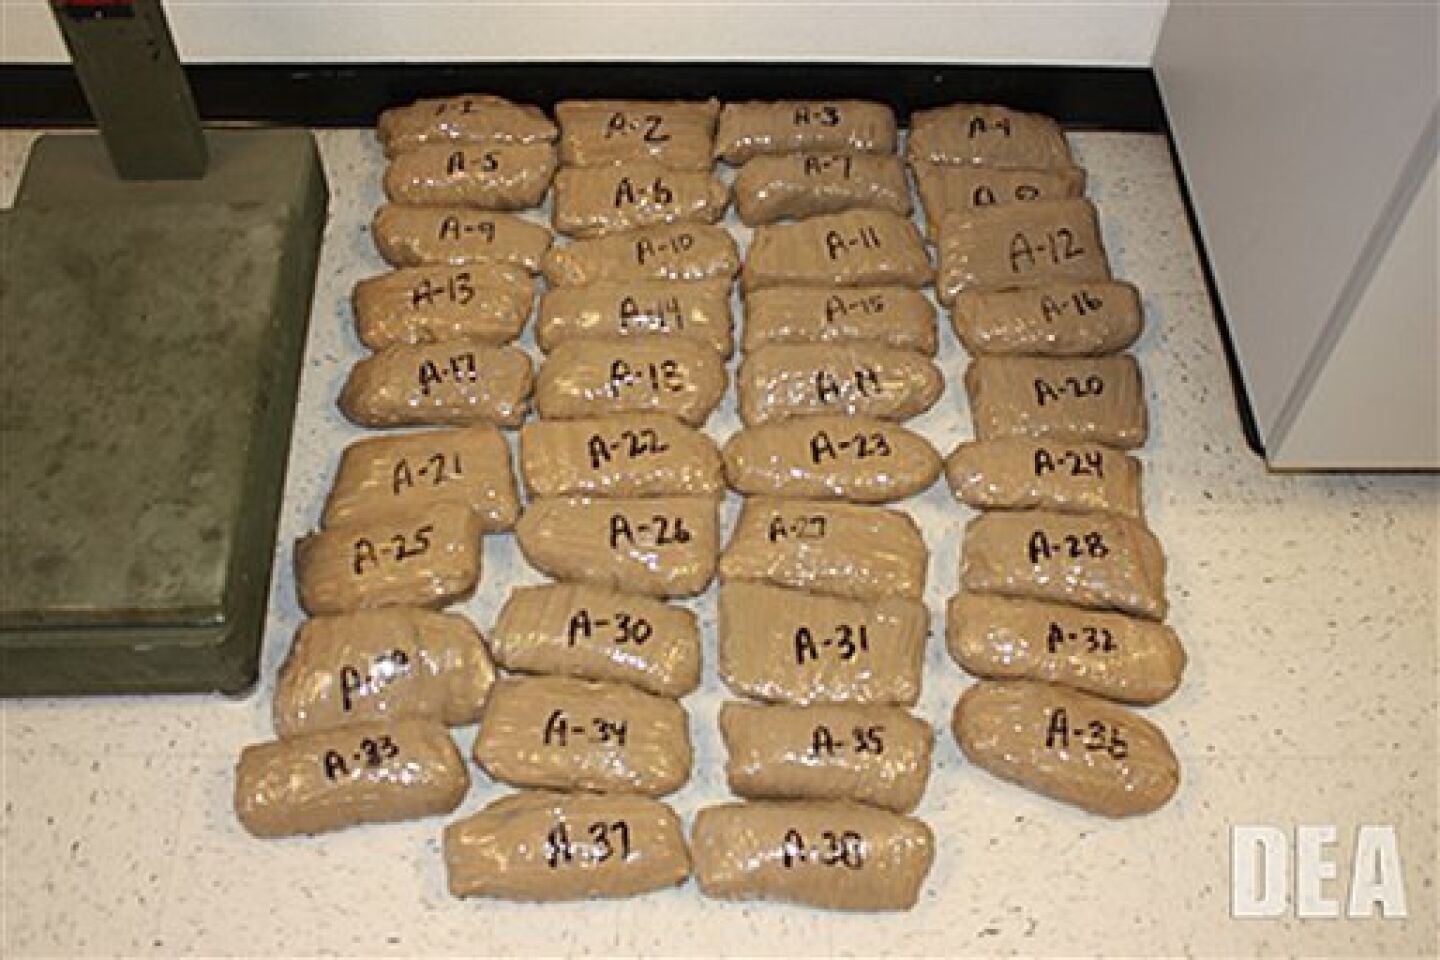 In this undated photo provided by the United States Drug Enforcement Administration, shows 39 pounds of methamphetamine smuggled through a 240-yard, complete and fully operational drug smuggling tunnel that ran from a small business in Arizona to an ice plant on the Mexico side of the border, Thurs